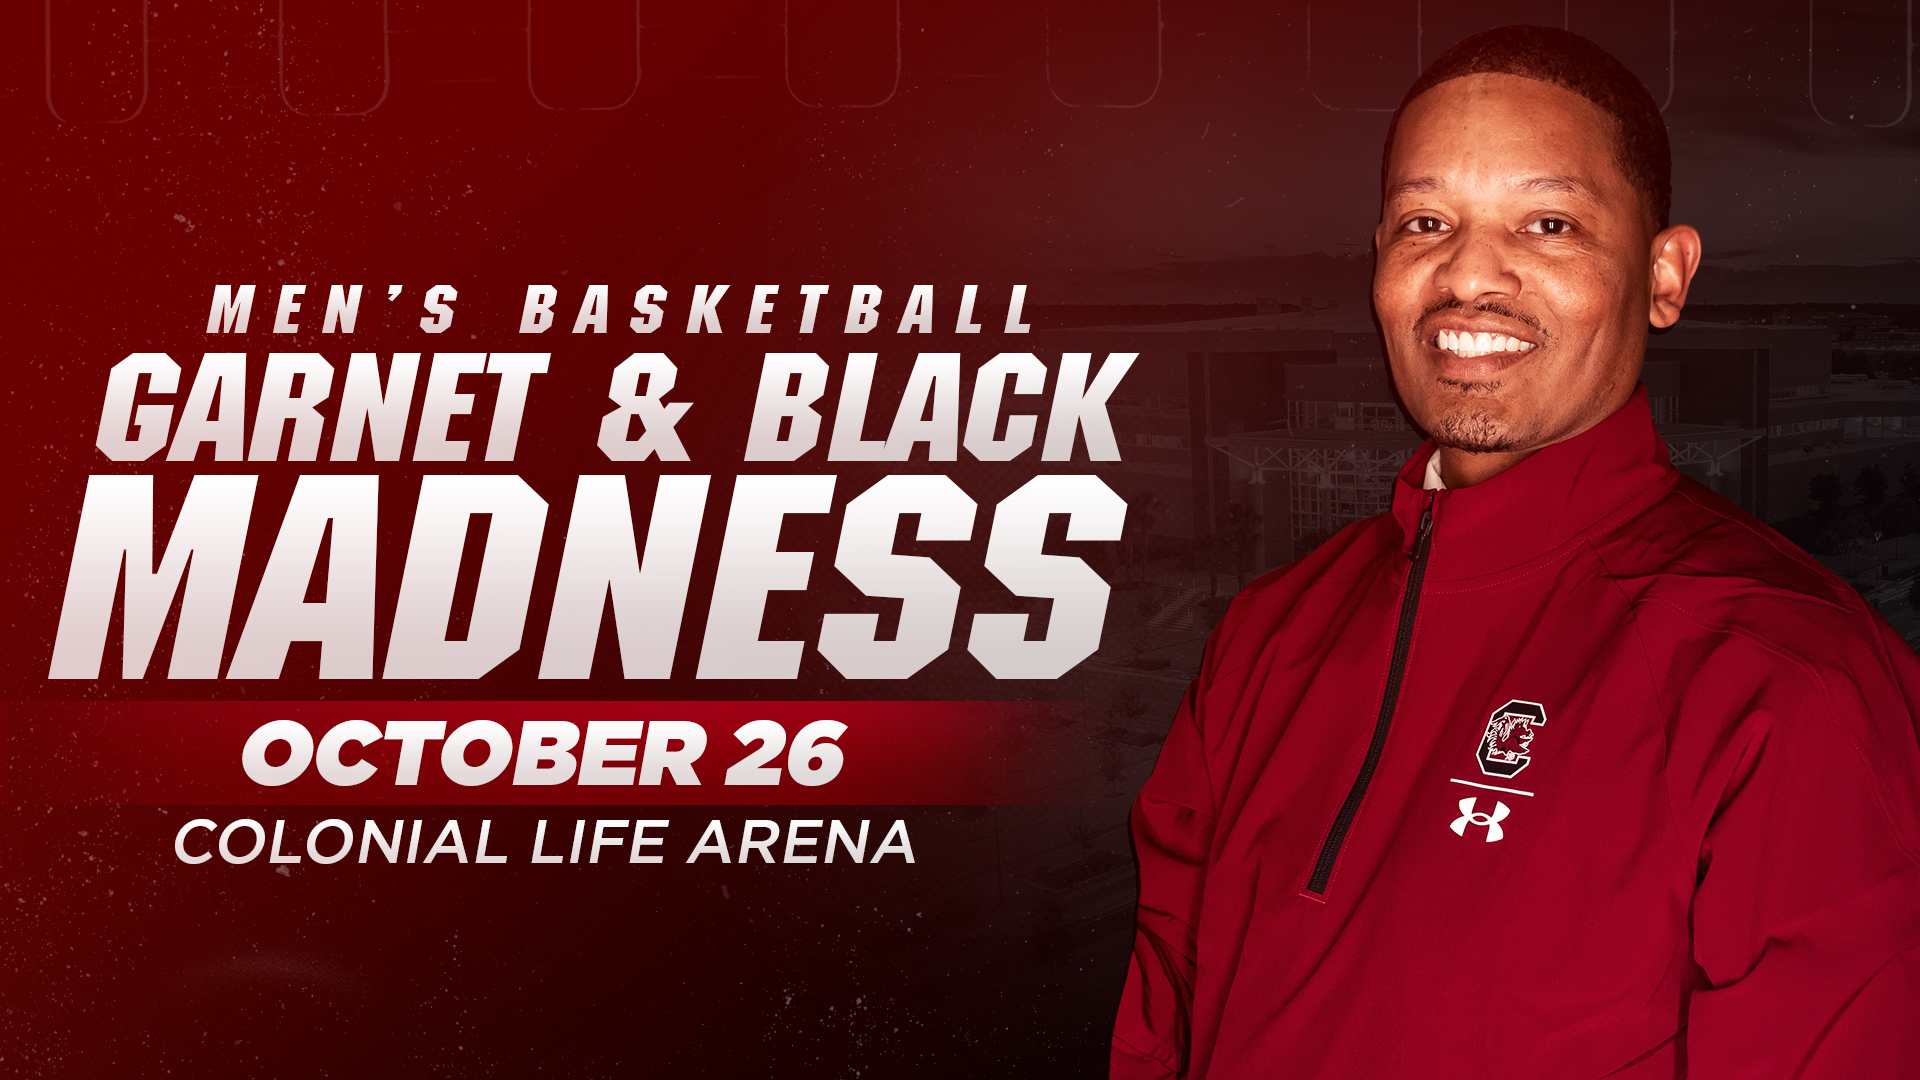 Garnet & Black Madness Set for Oct. 26 at Colonial Life Arena